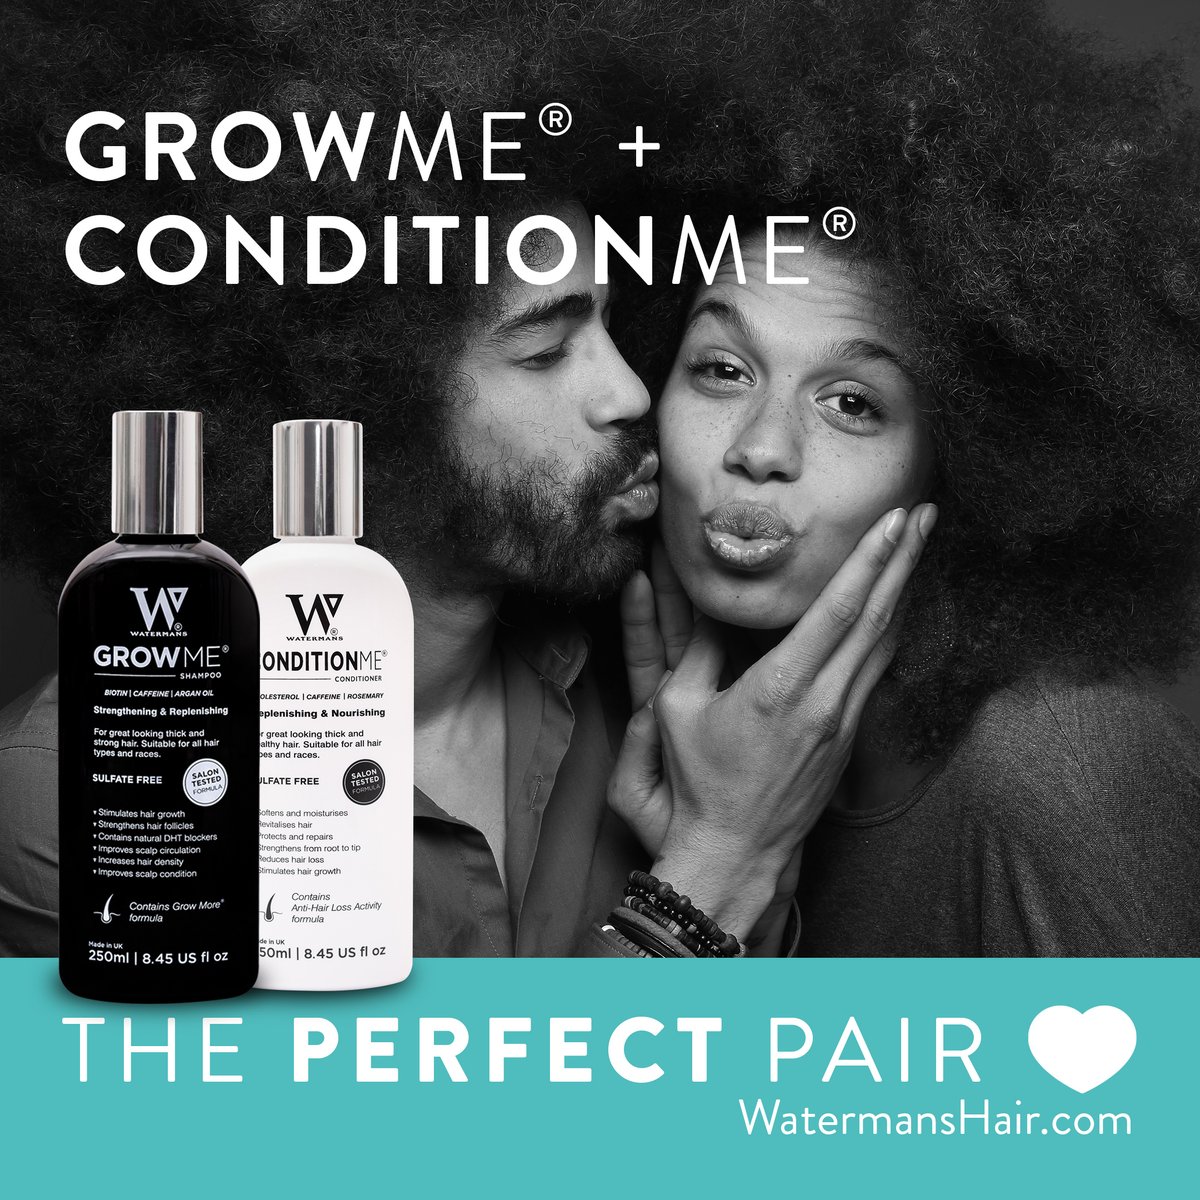 It's a match made in Heaven! 💕

#GrowMe #PerfectPair #HairlossSolutions #TotalHaircareSolutions #BestShampooAndConditioner #HaircarePartners #UnisexHaircare #healthyhaircare #naturalhaircare #haircareproducts #LoveWatermans